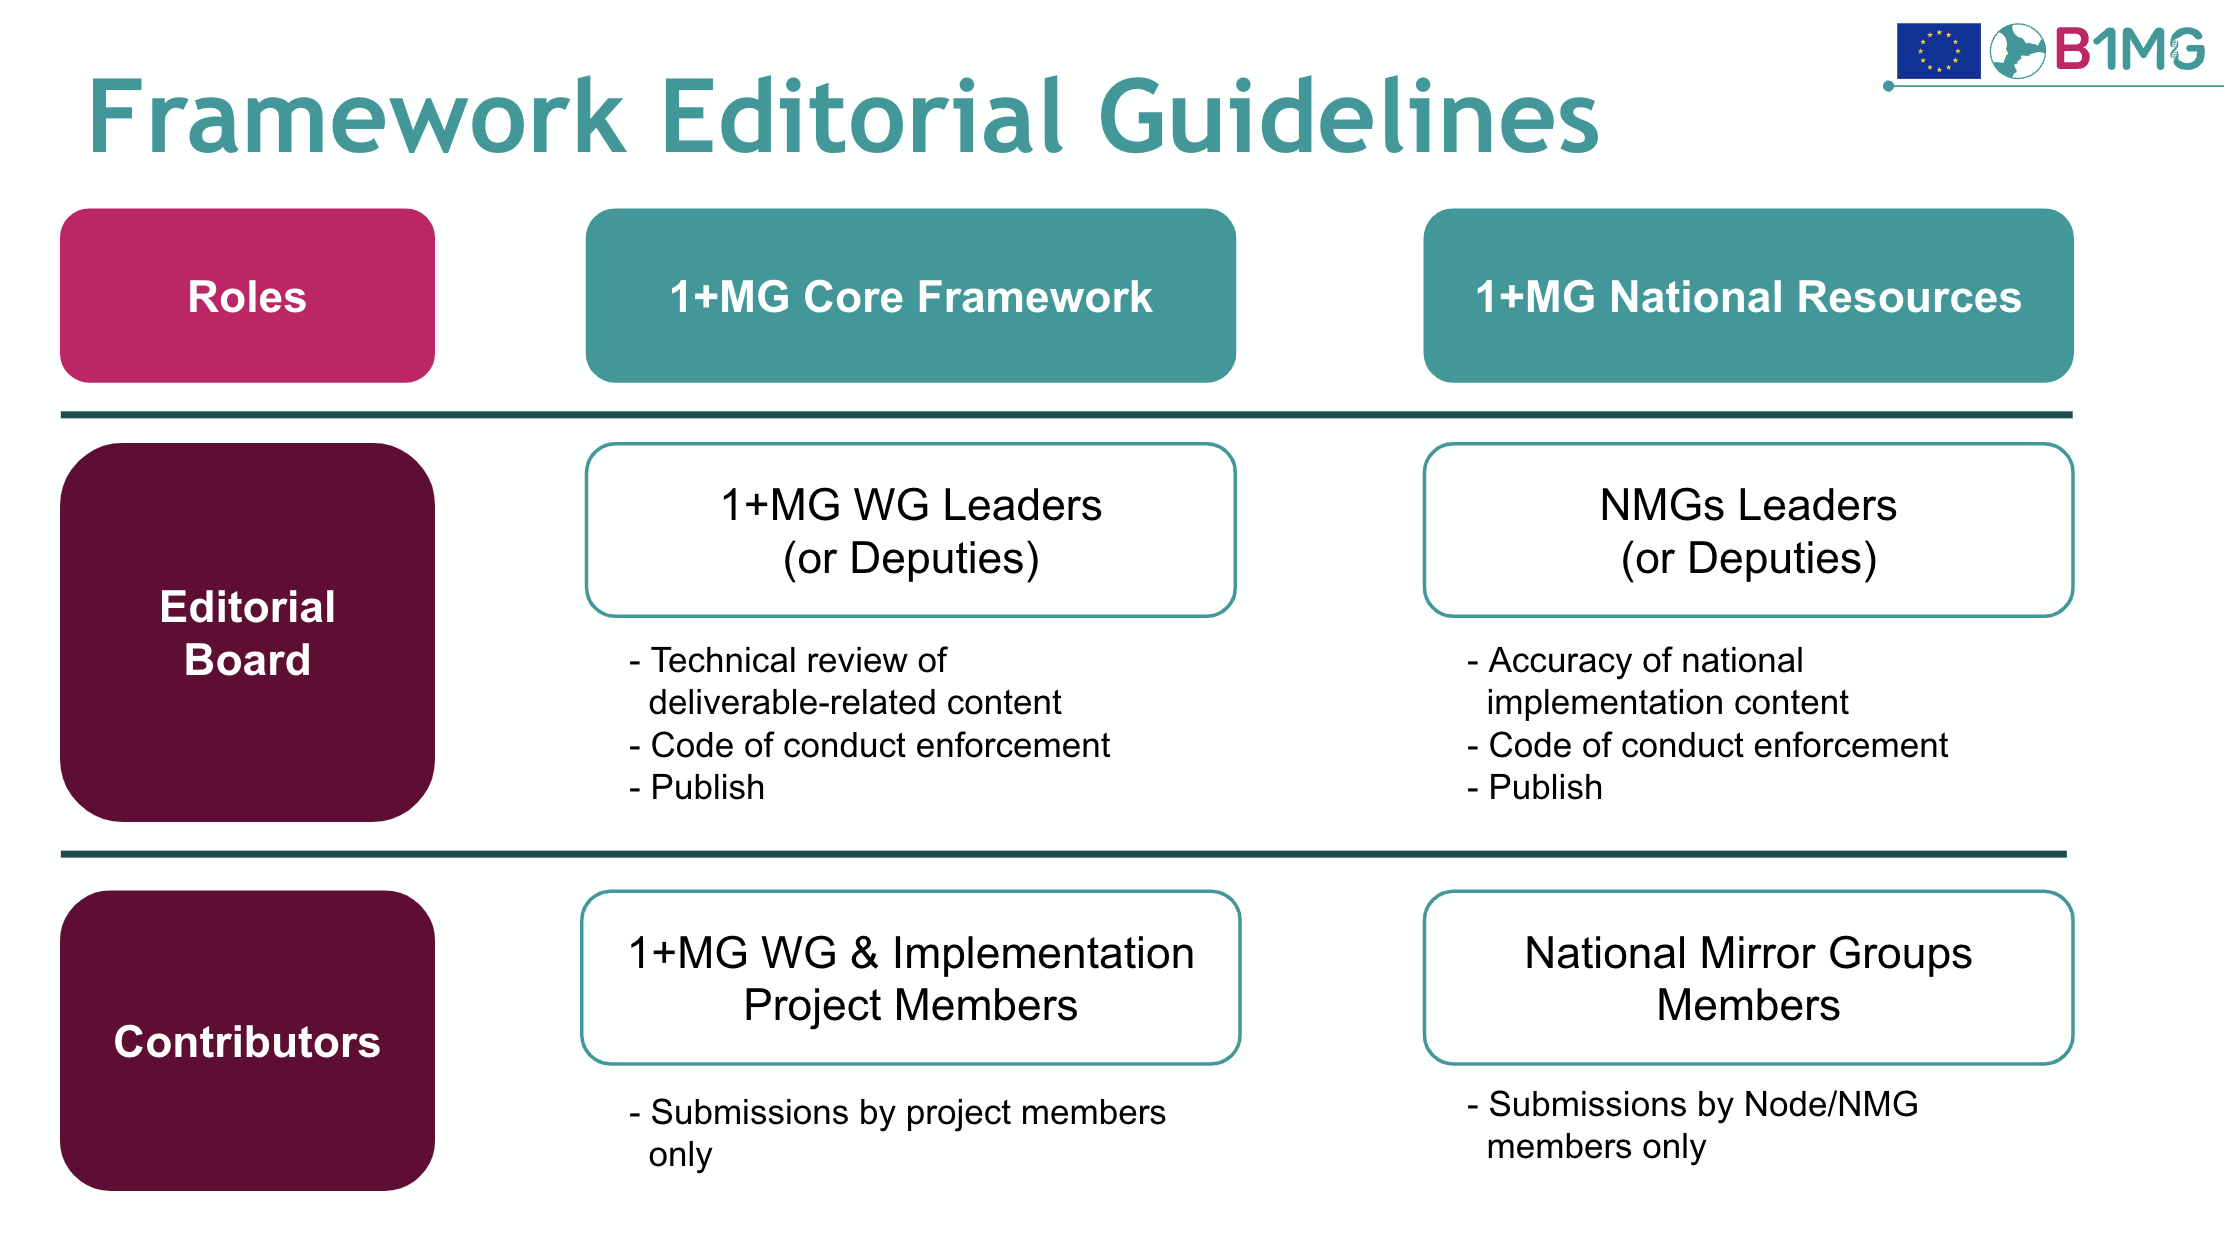 Editorial guidelines